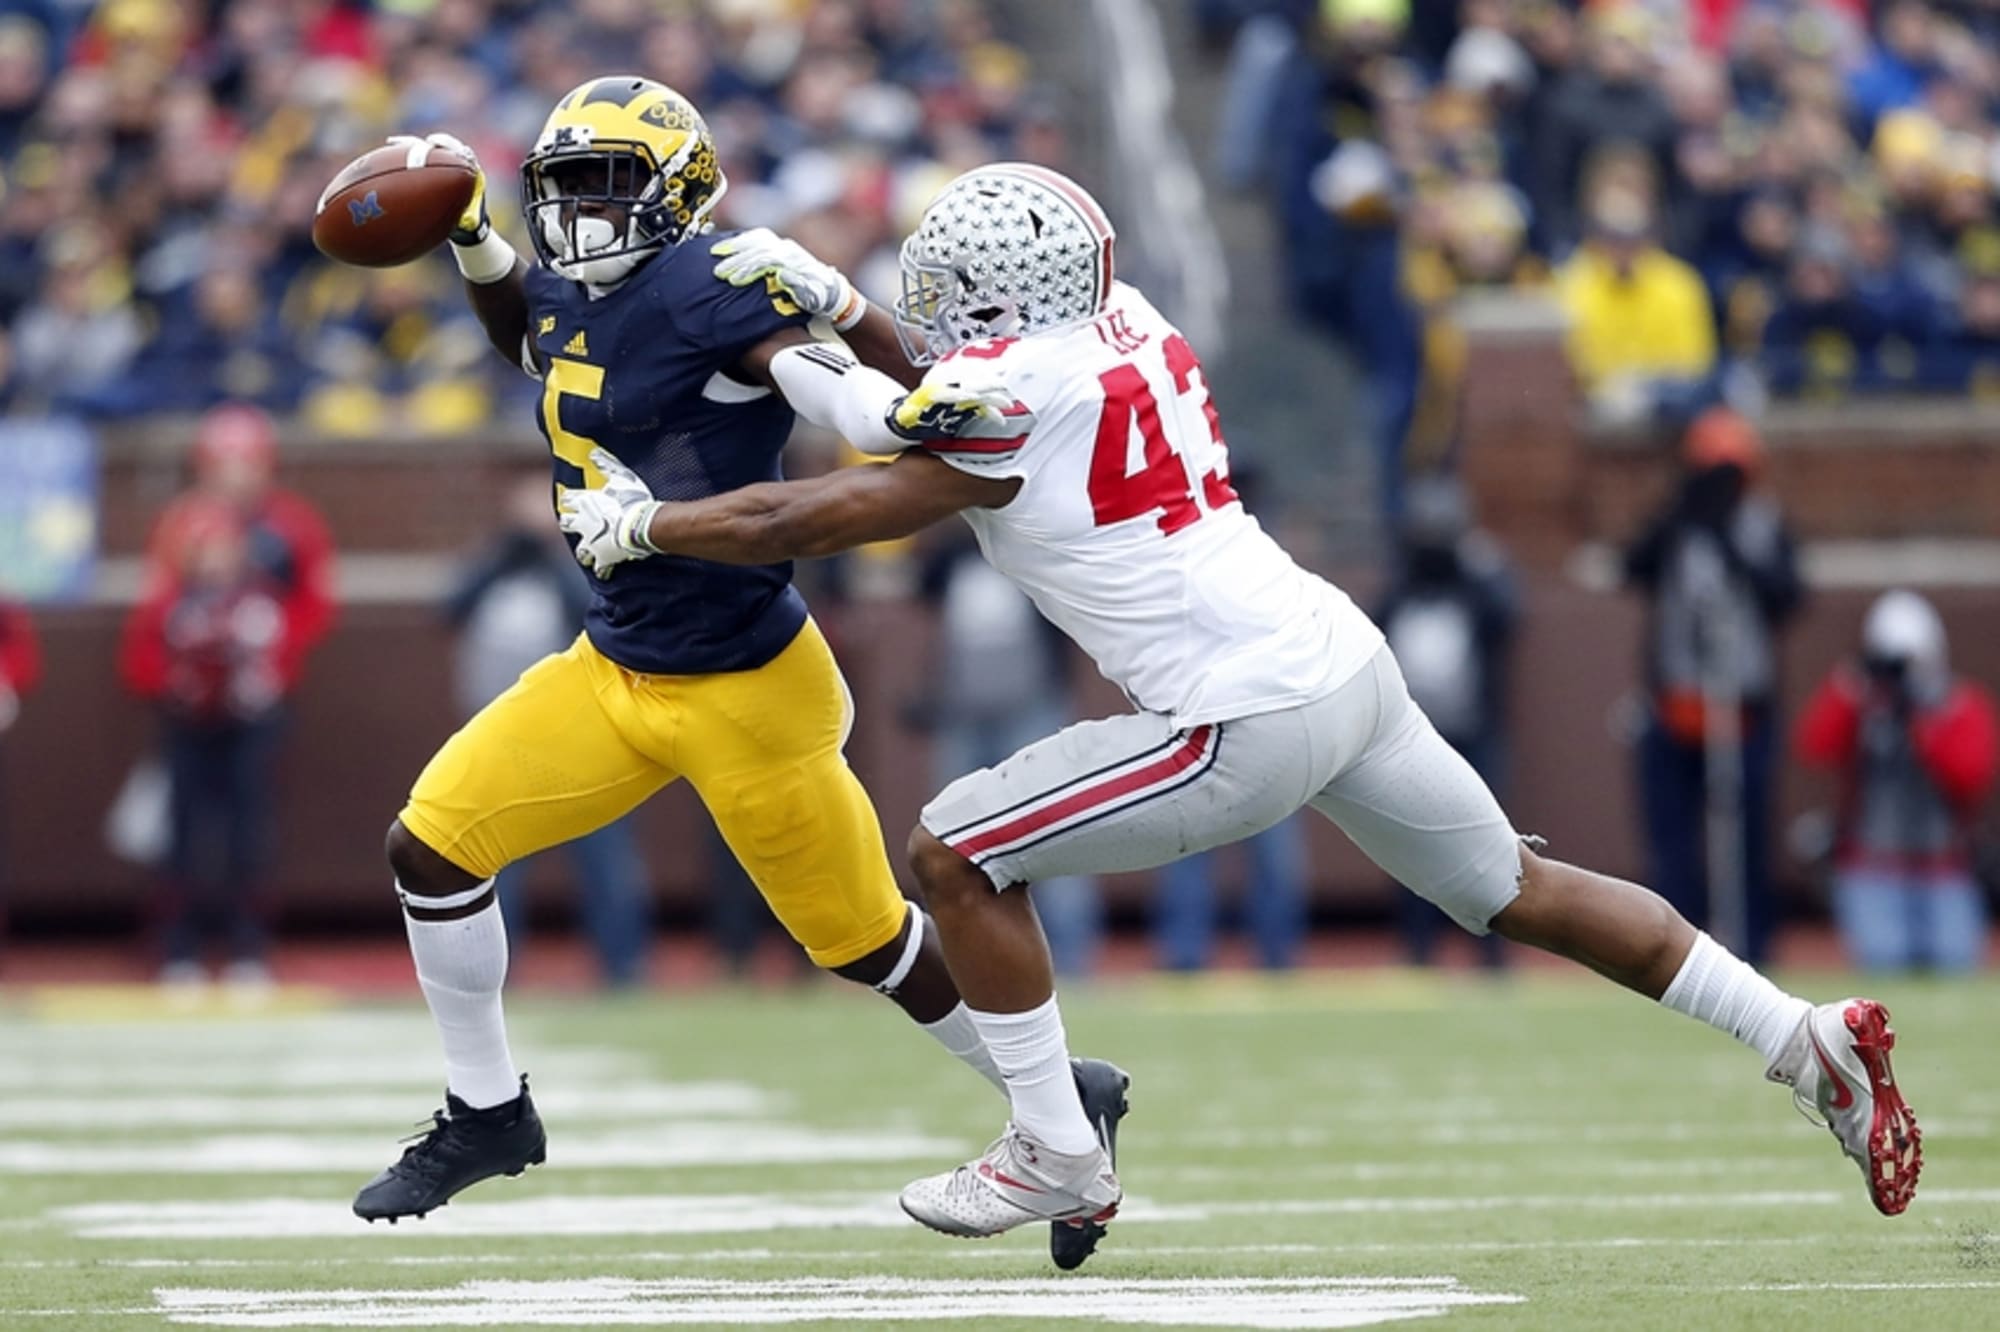 Darron Lee, LB, Ohio State: 2016 NFL Draft Scouting Report